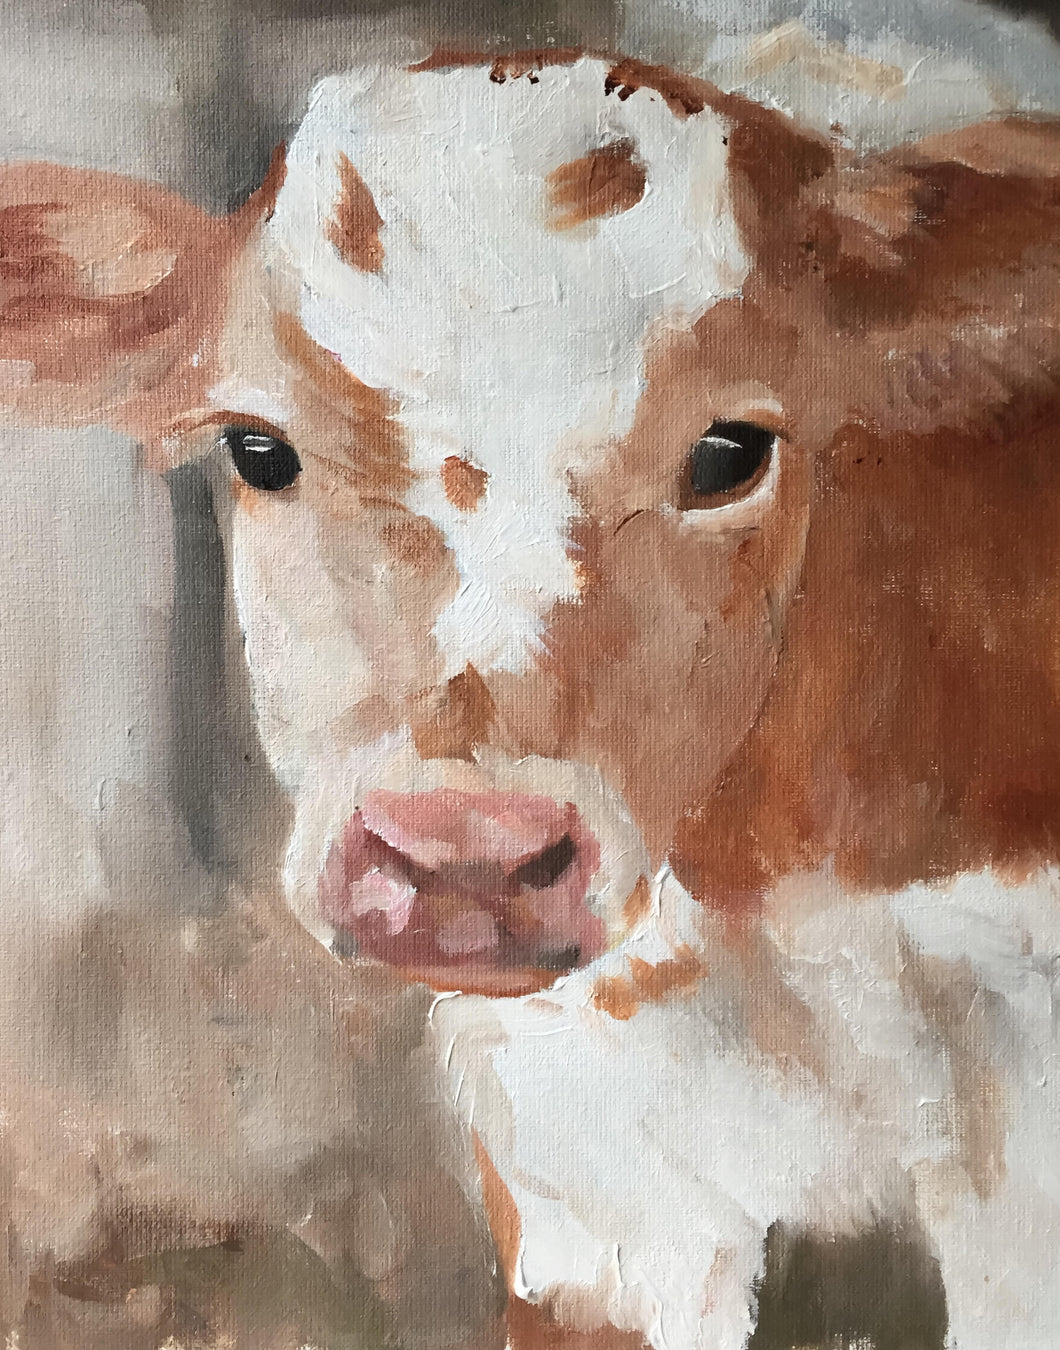 Cow Painting,Prints, Canvas, Posters, Originals, Commissions, Fine Art, from original oil painting by James Coates